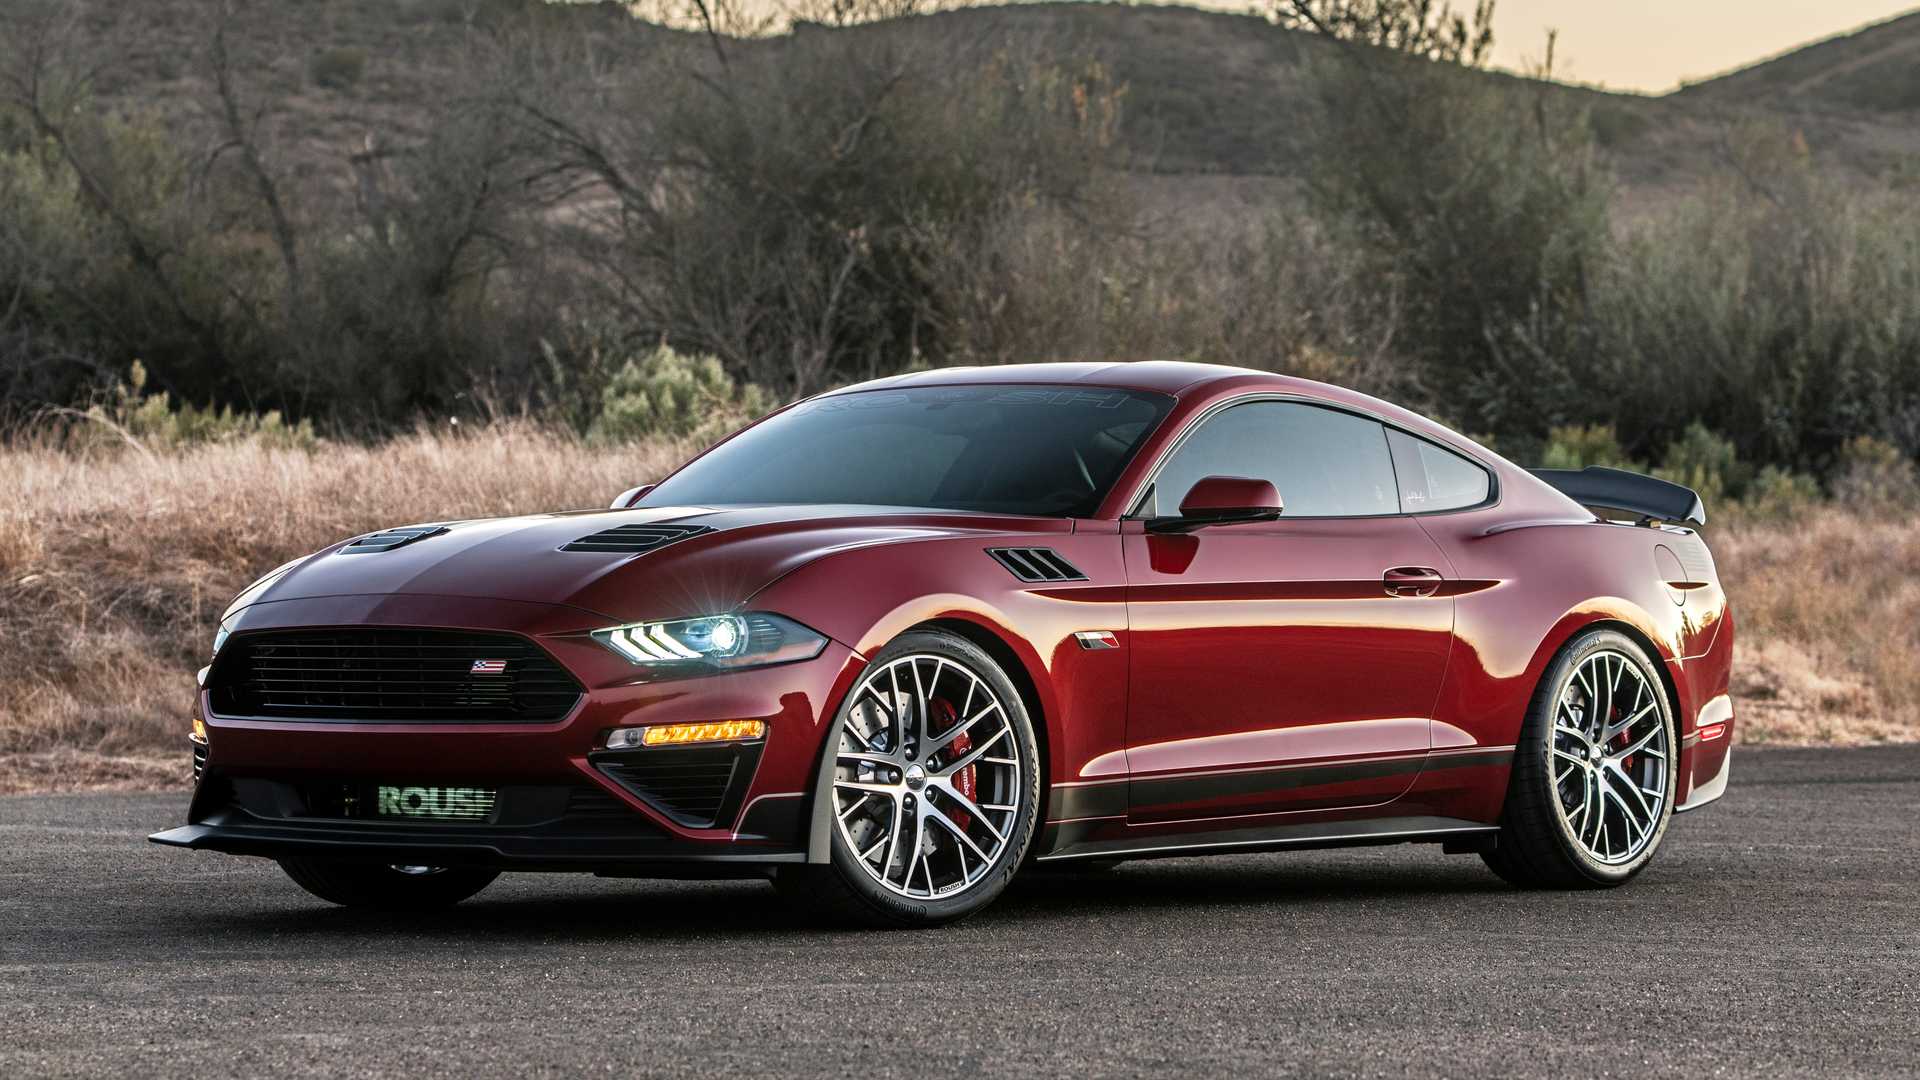 Jack Roush Couldn't Stop Signing This 775-HP Mustang - autoevolution